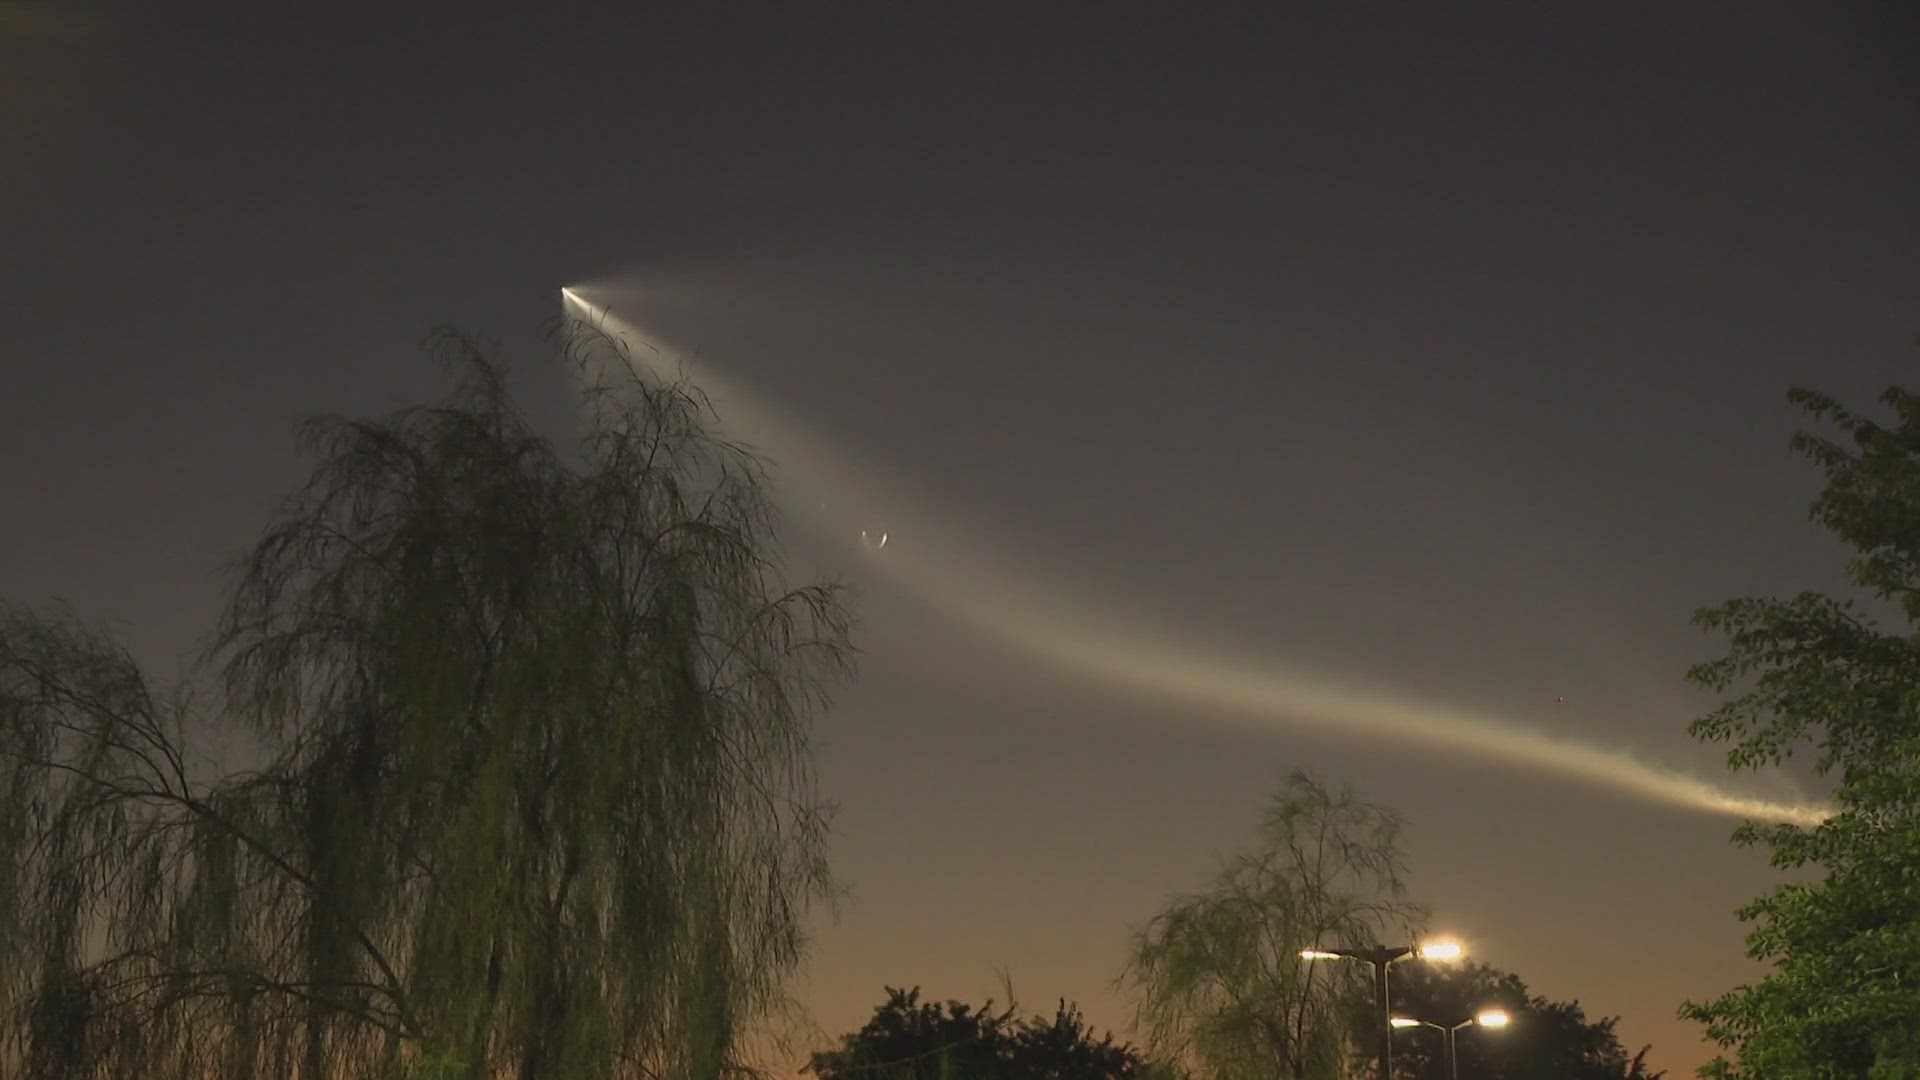 SpaceX launches over Arizona: Why do they look like that?